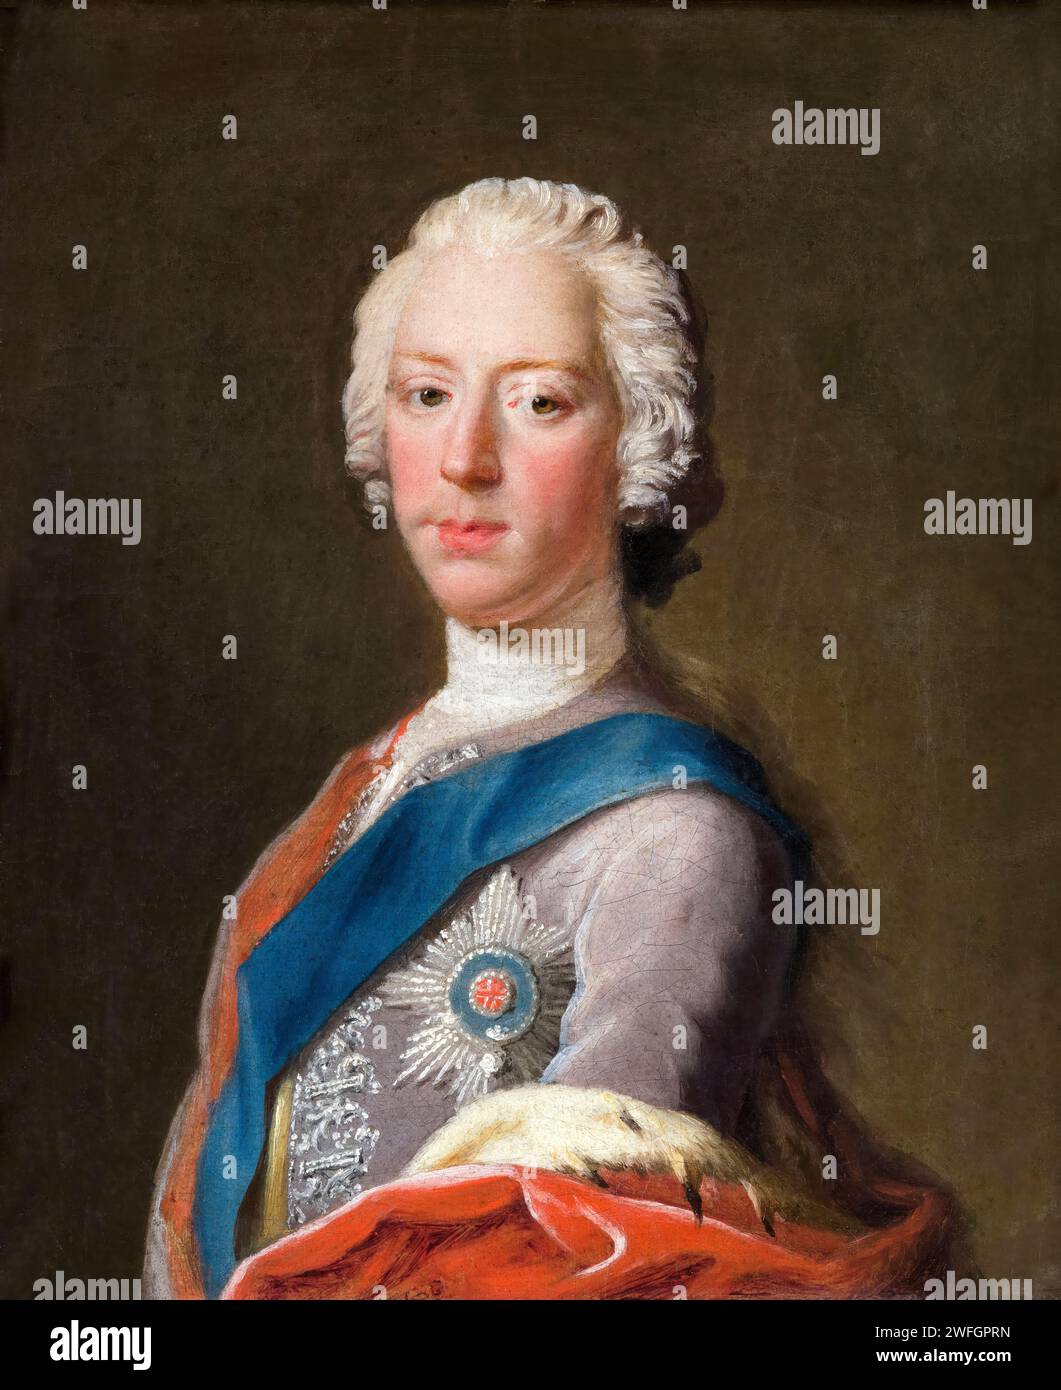 Prince Charles Edward Stuart (1720-1788), nicknamed 'Bonnie Prince Charlie', portrait painting in oil on canvas by Allan Ramsay, circa 1745 Stock Photo